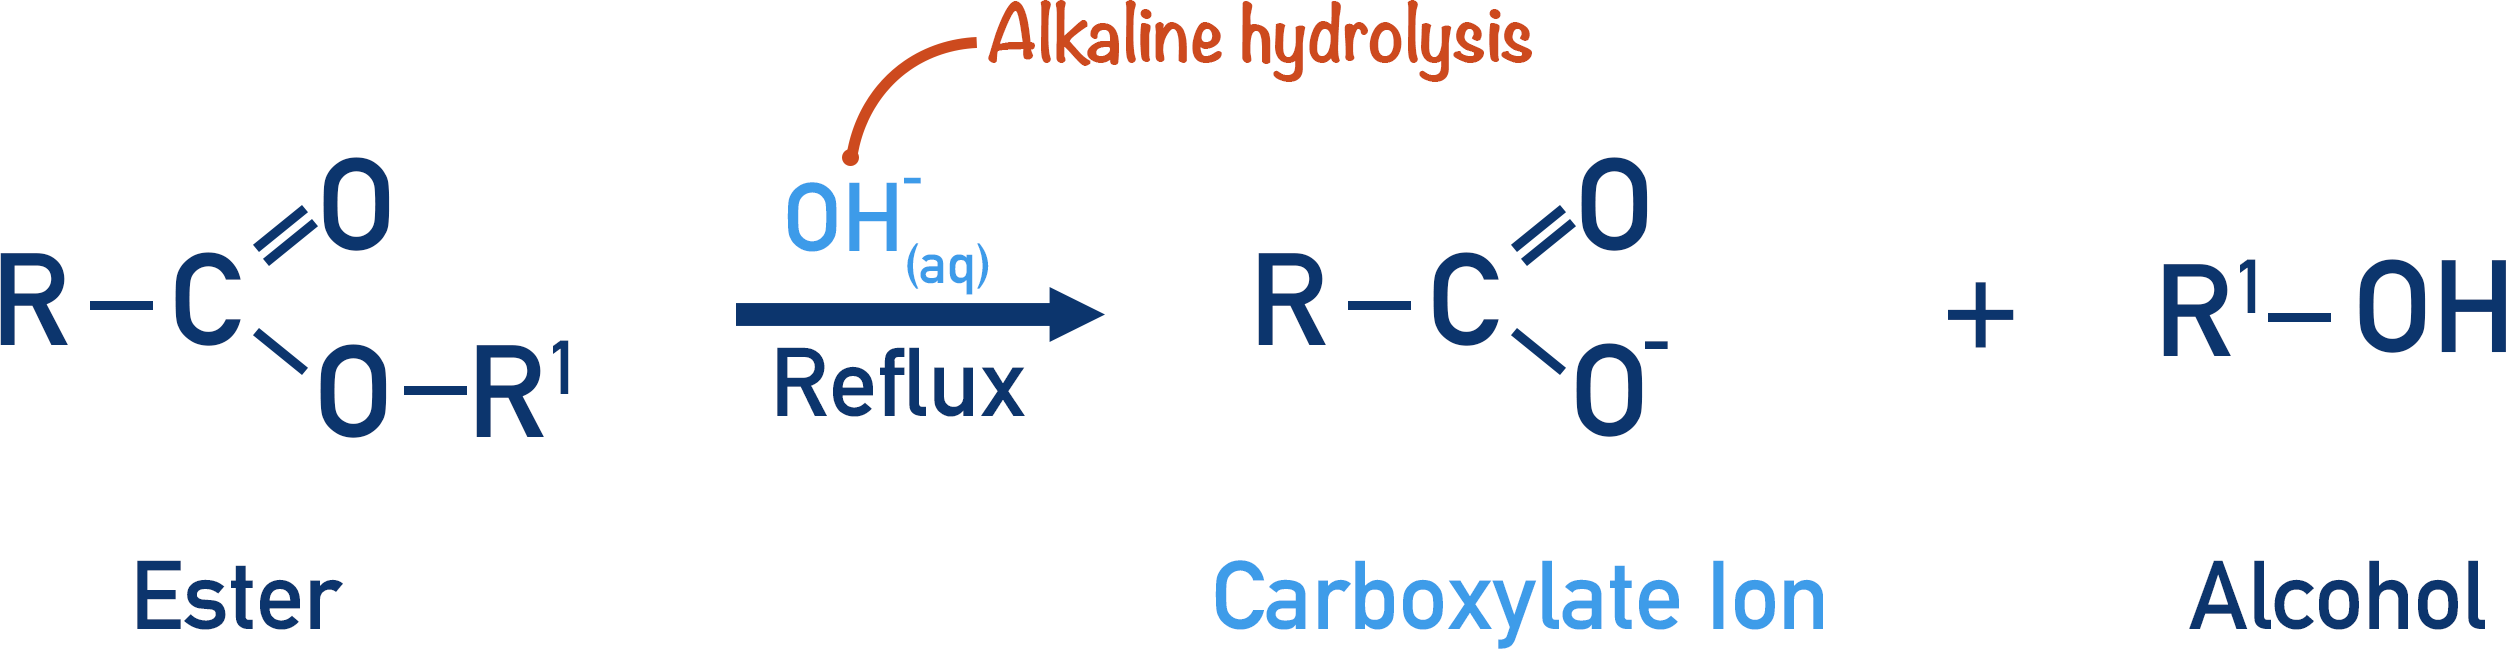 alkaline hydrolysis of ester reflux to form carboxylate ion